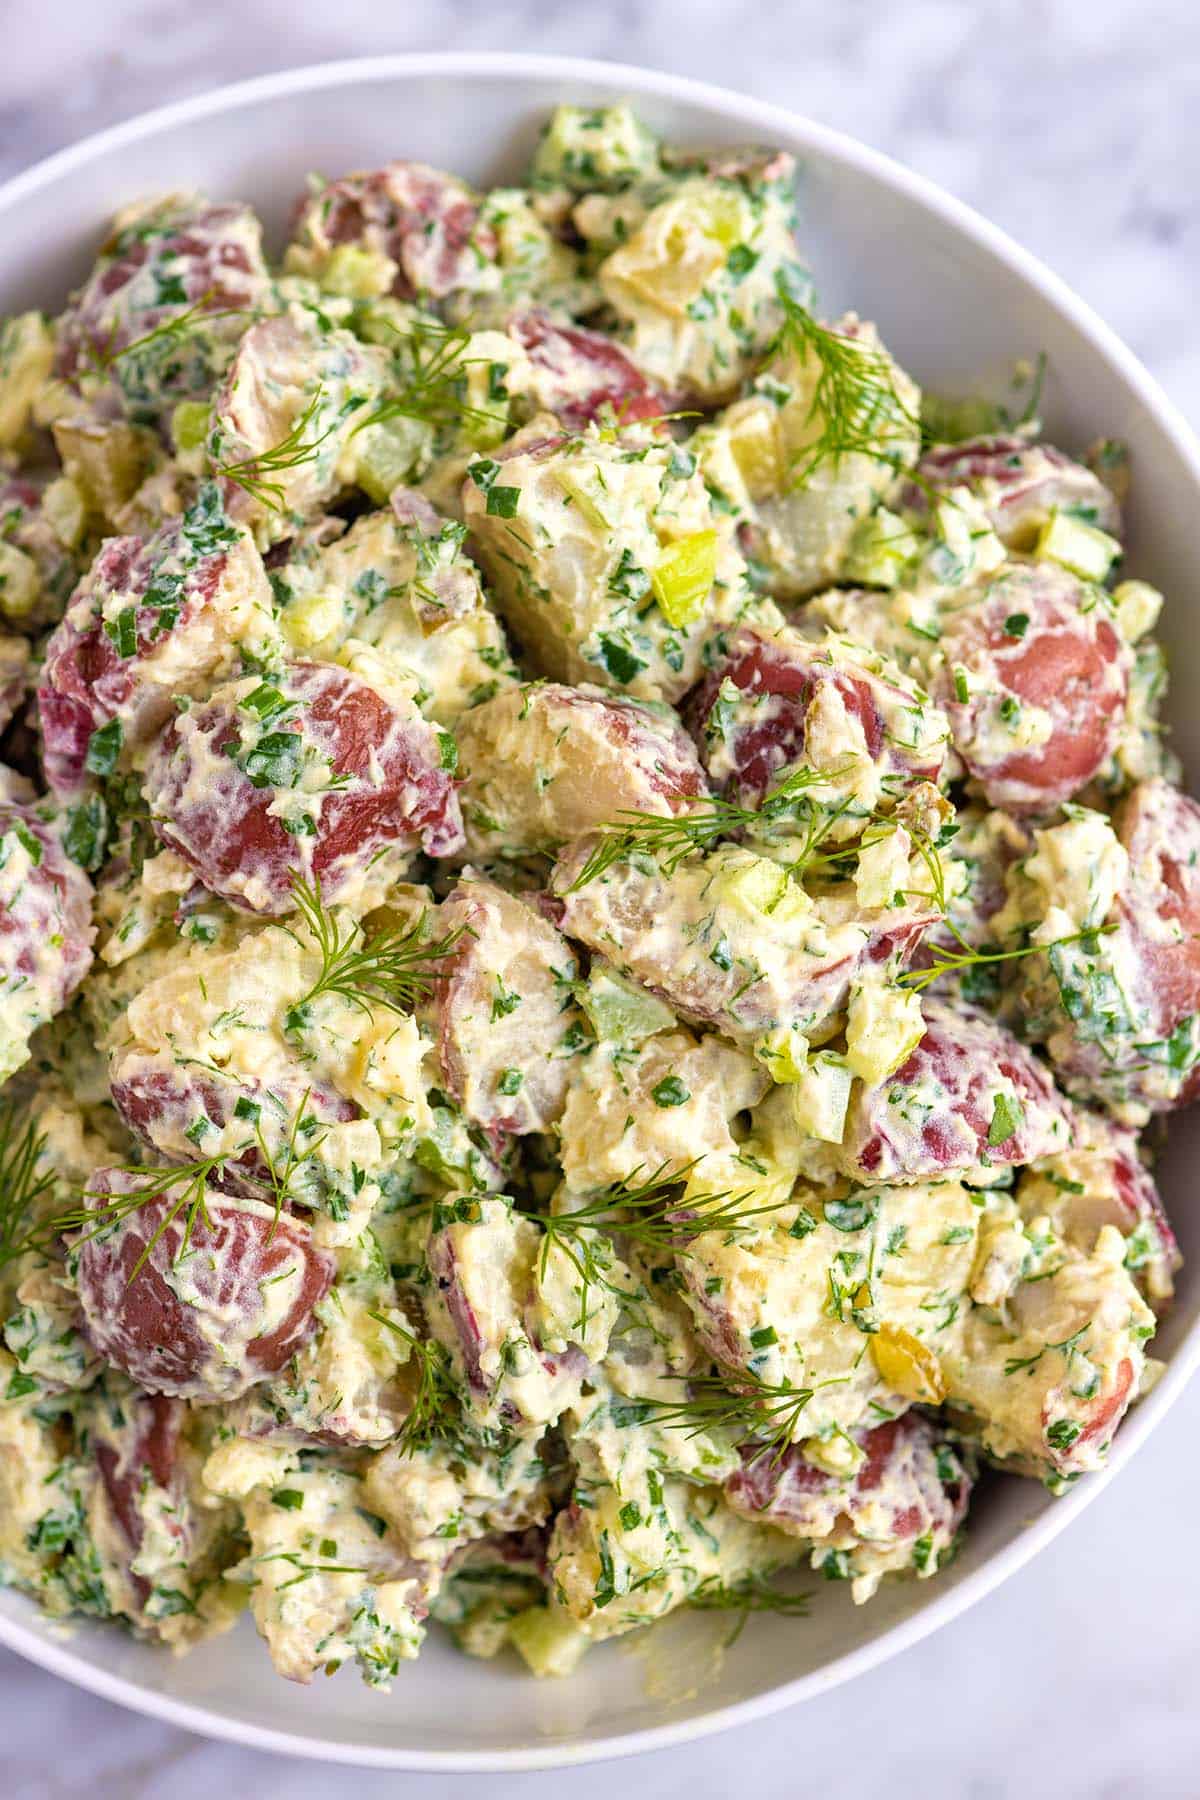 A bowl of red potato salad tossed in a creamy dressing